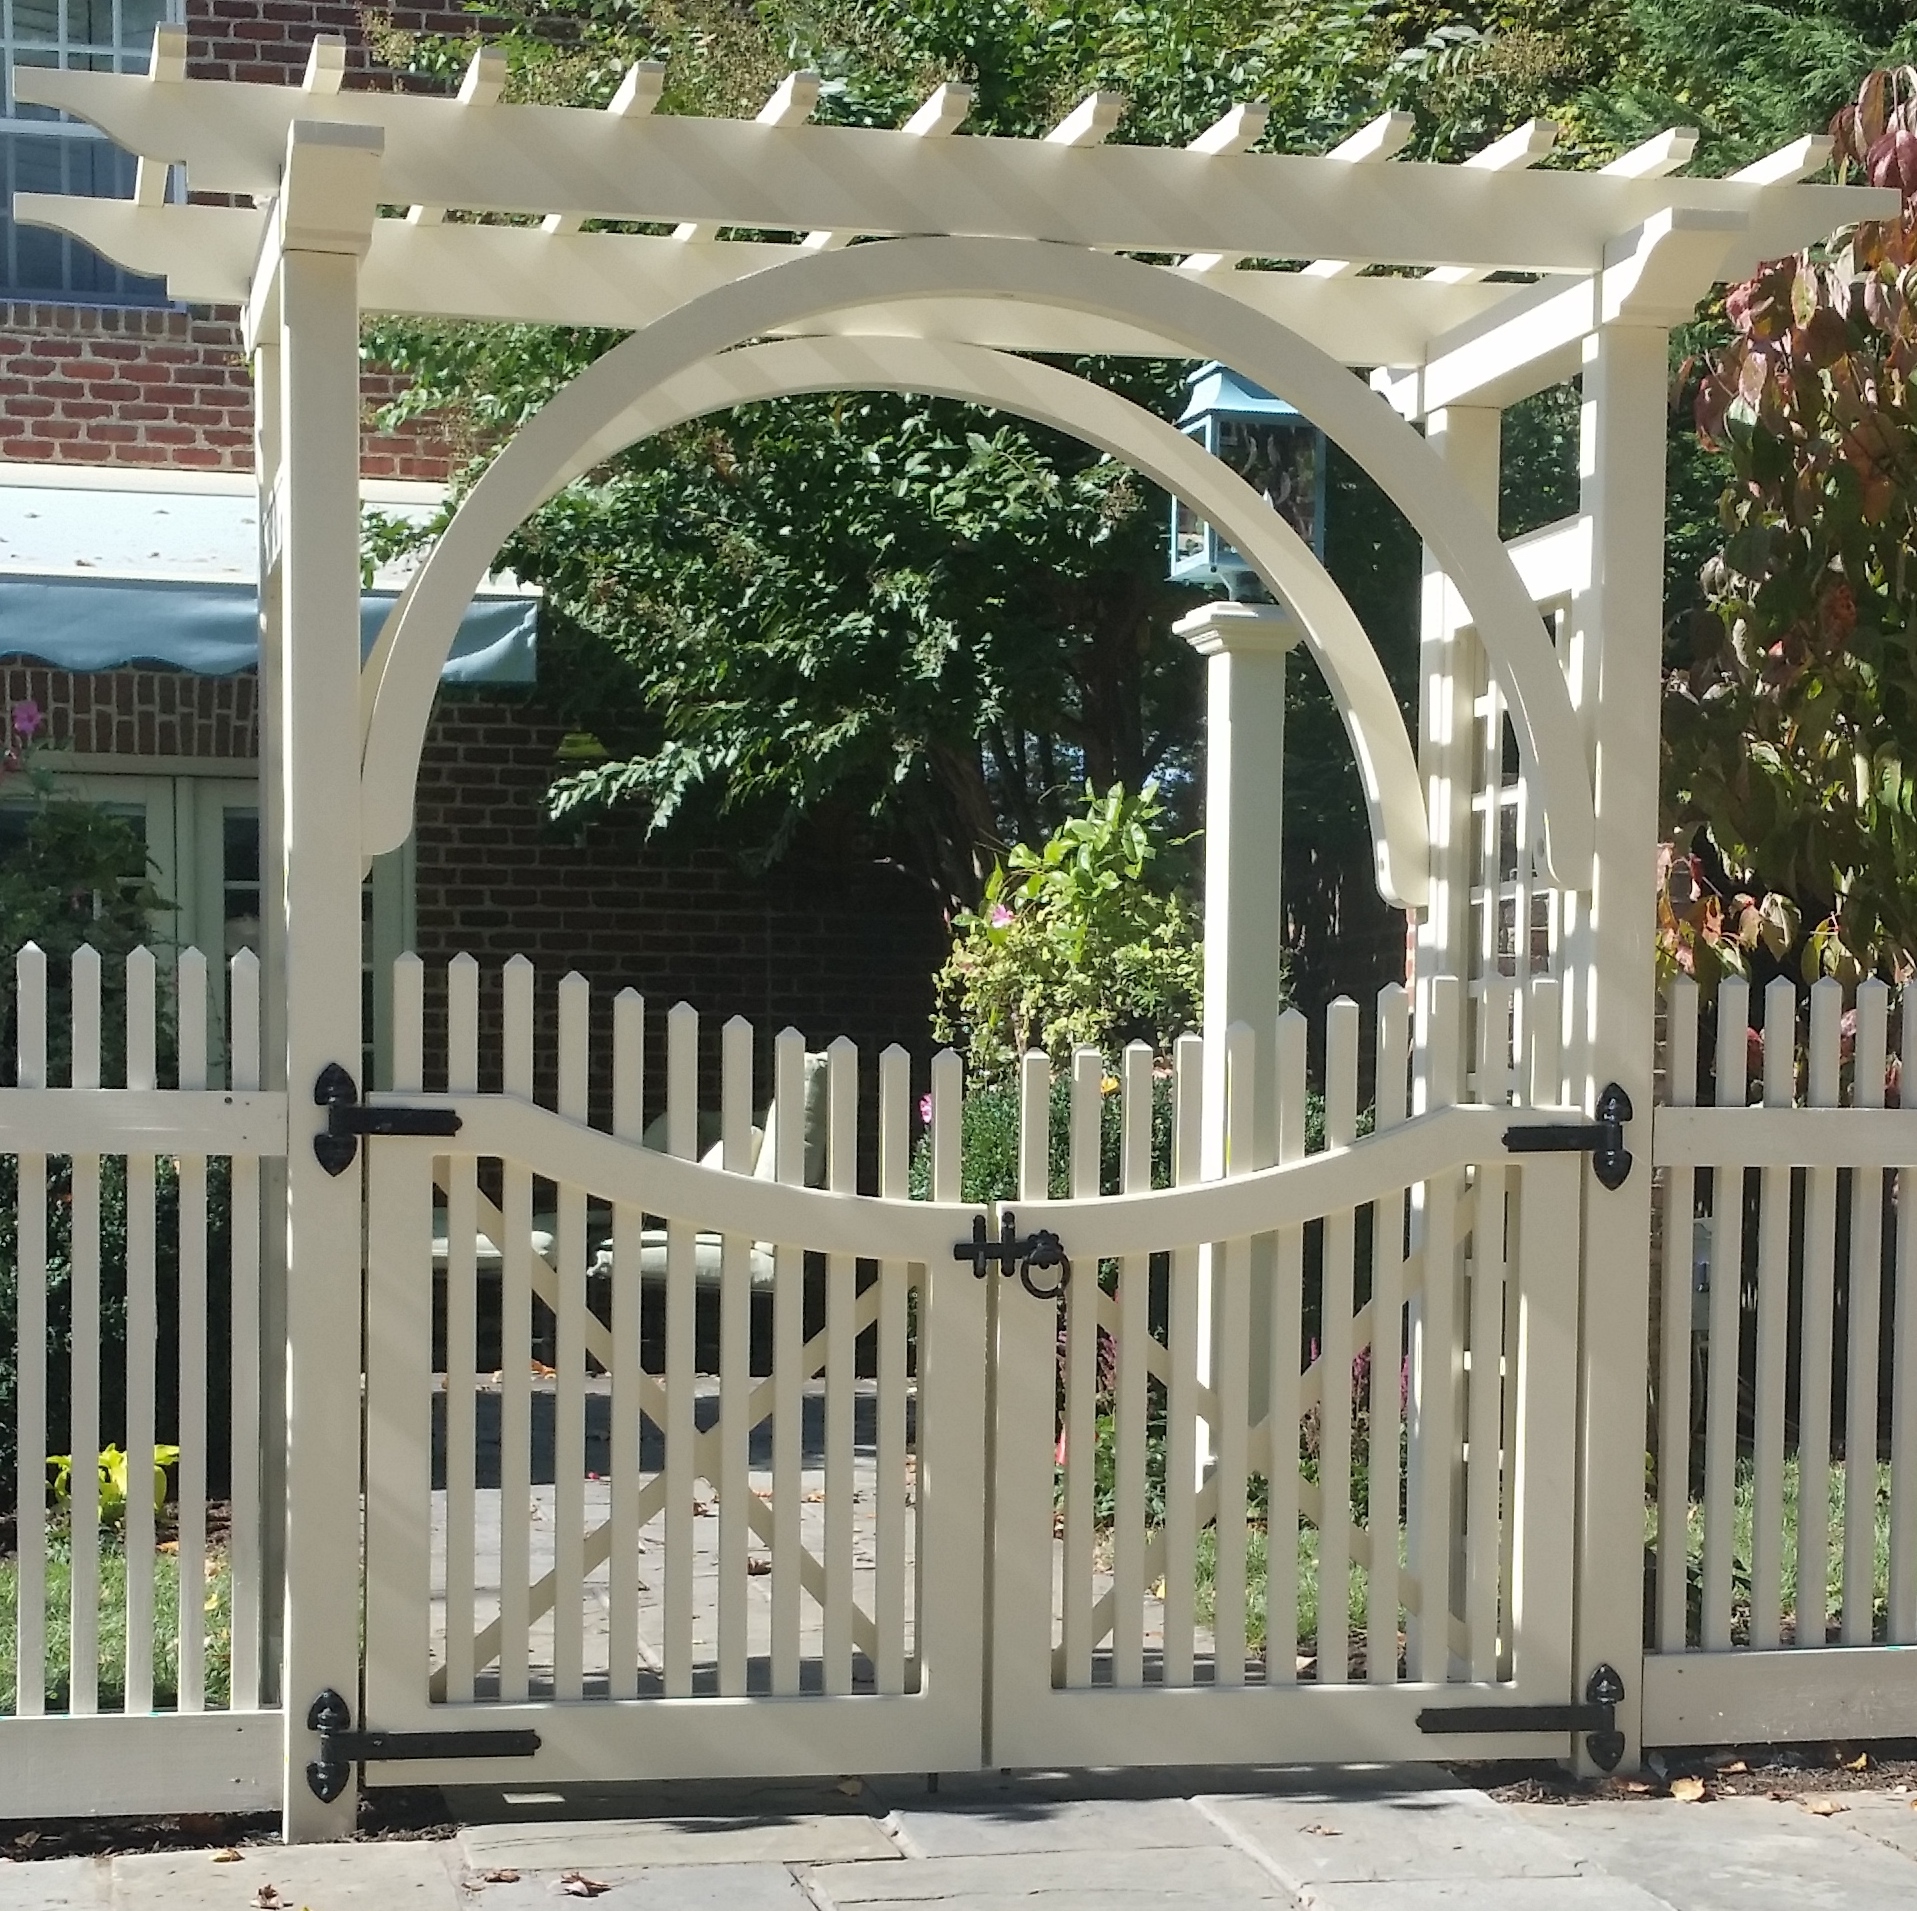 A Beautiful Arch and Arbor/Pergola over a 2x2 Picket Double Gate